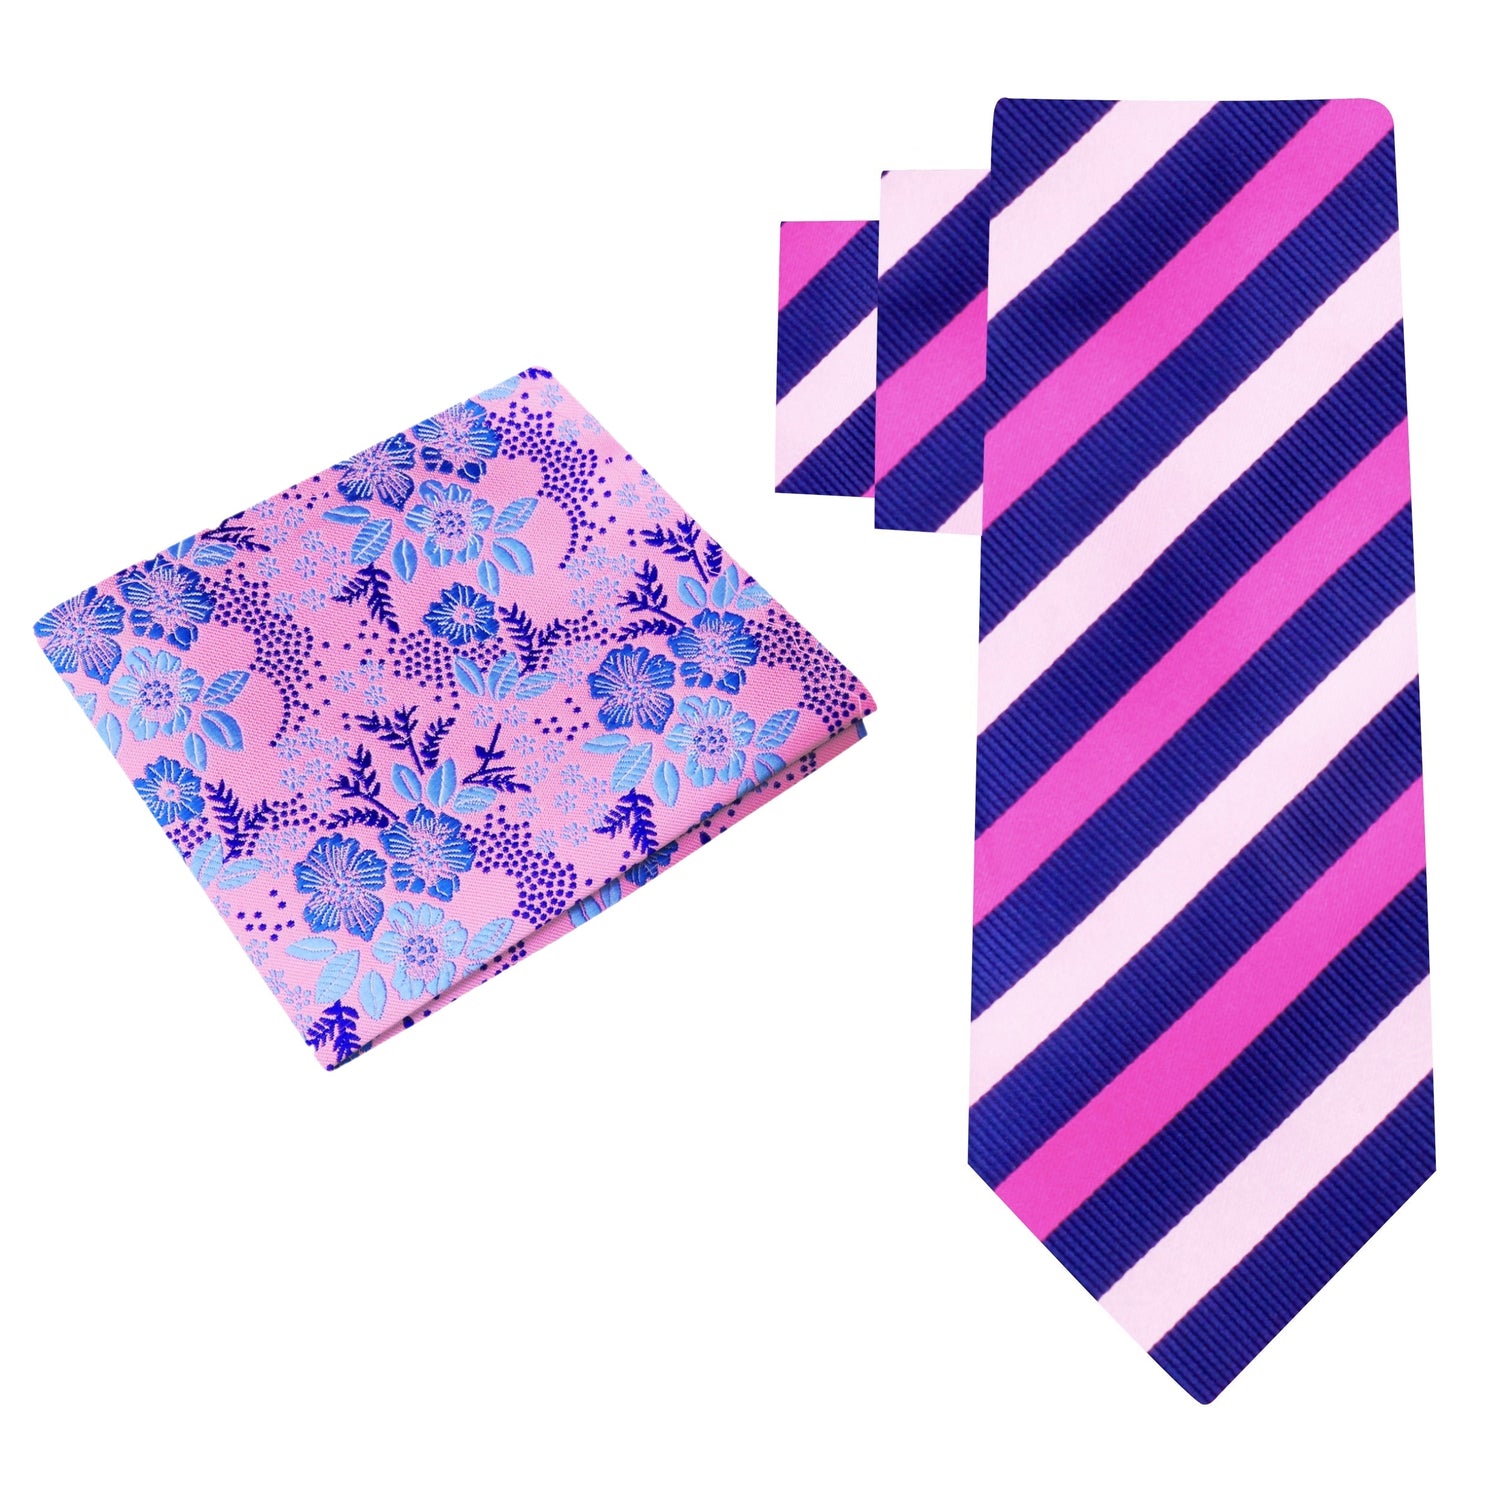 Alt View: Blue with Shades of Pink Stripe Necktie and Pink Blue Floral Square